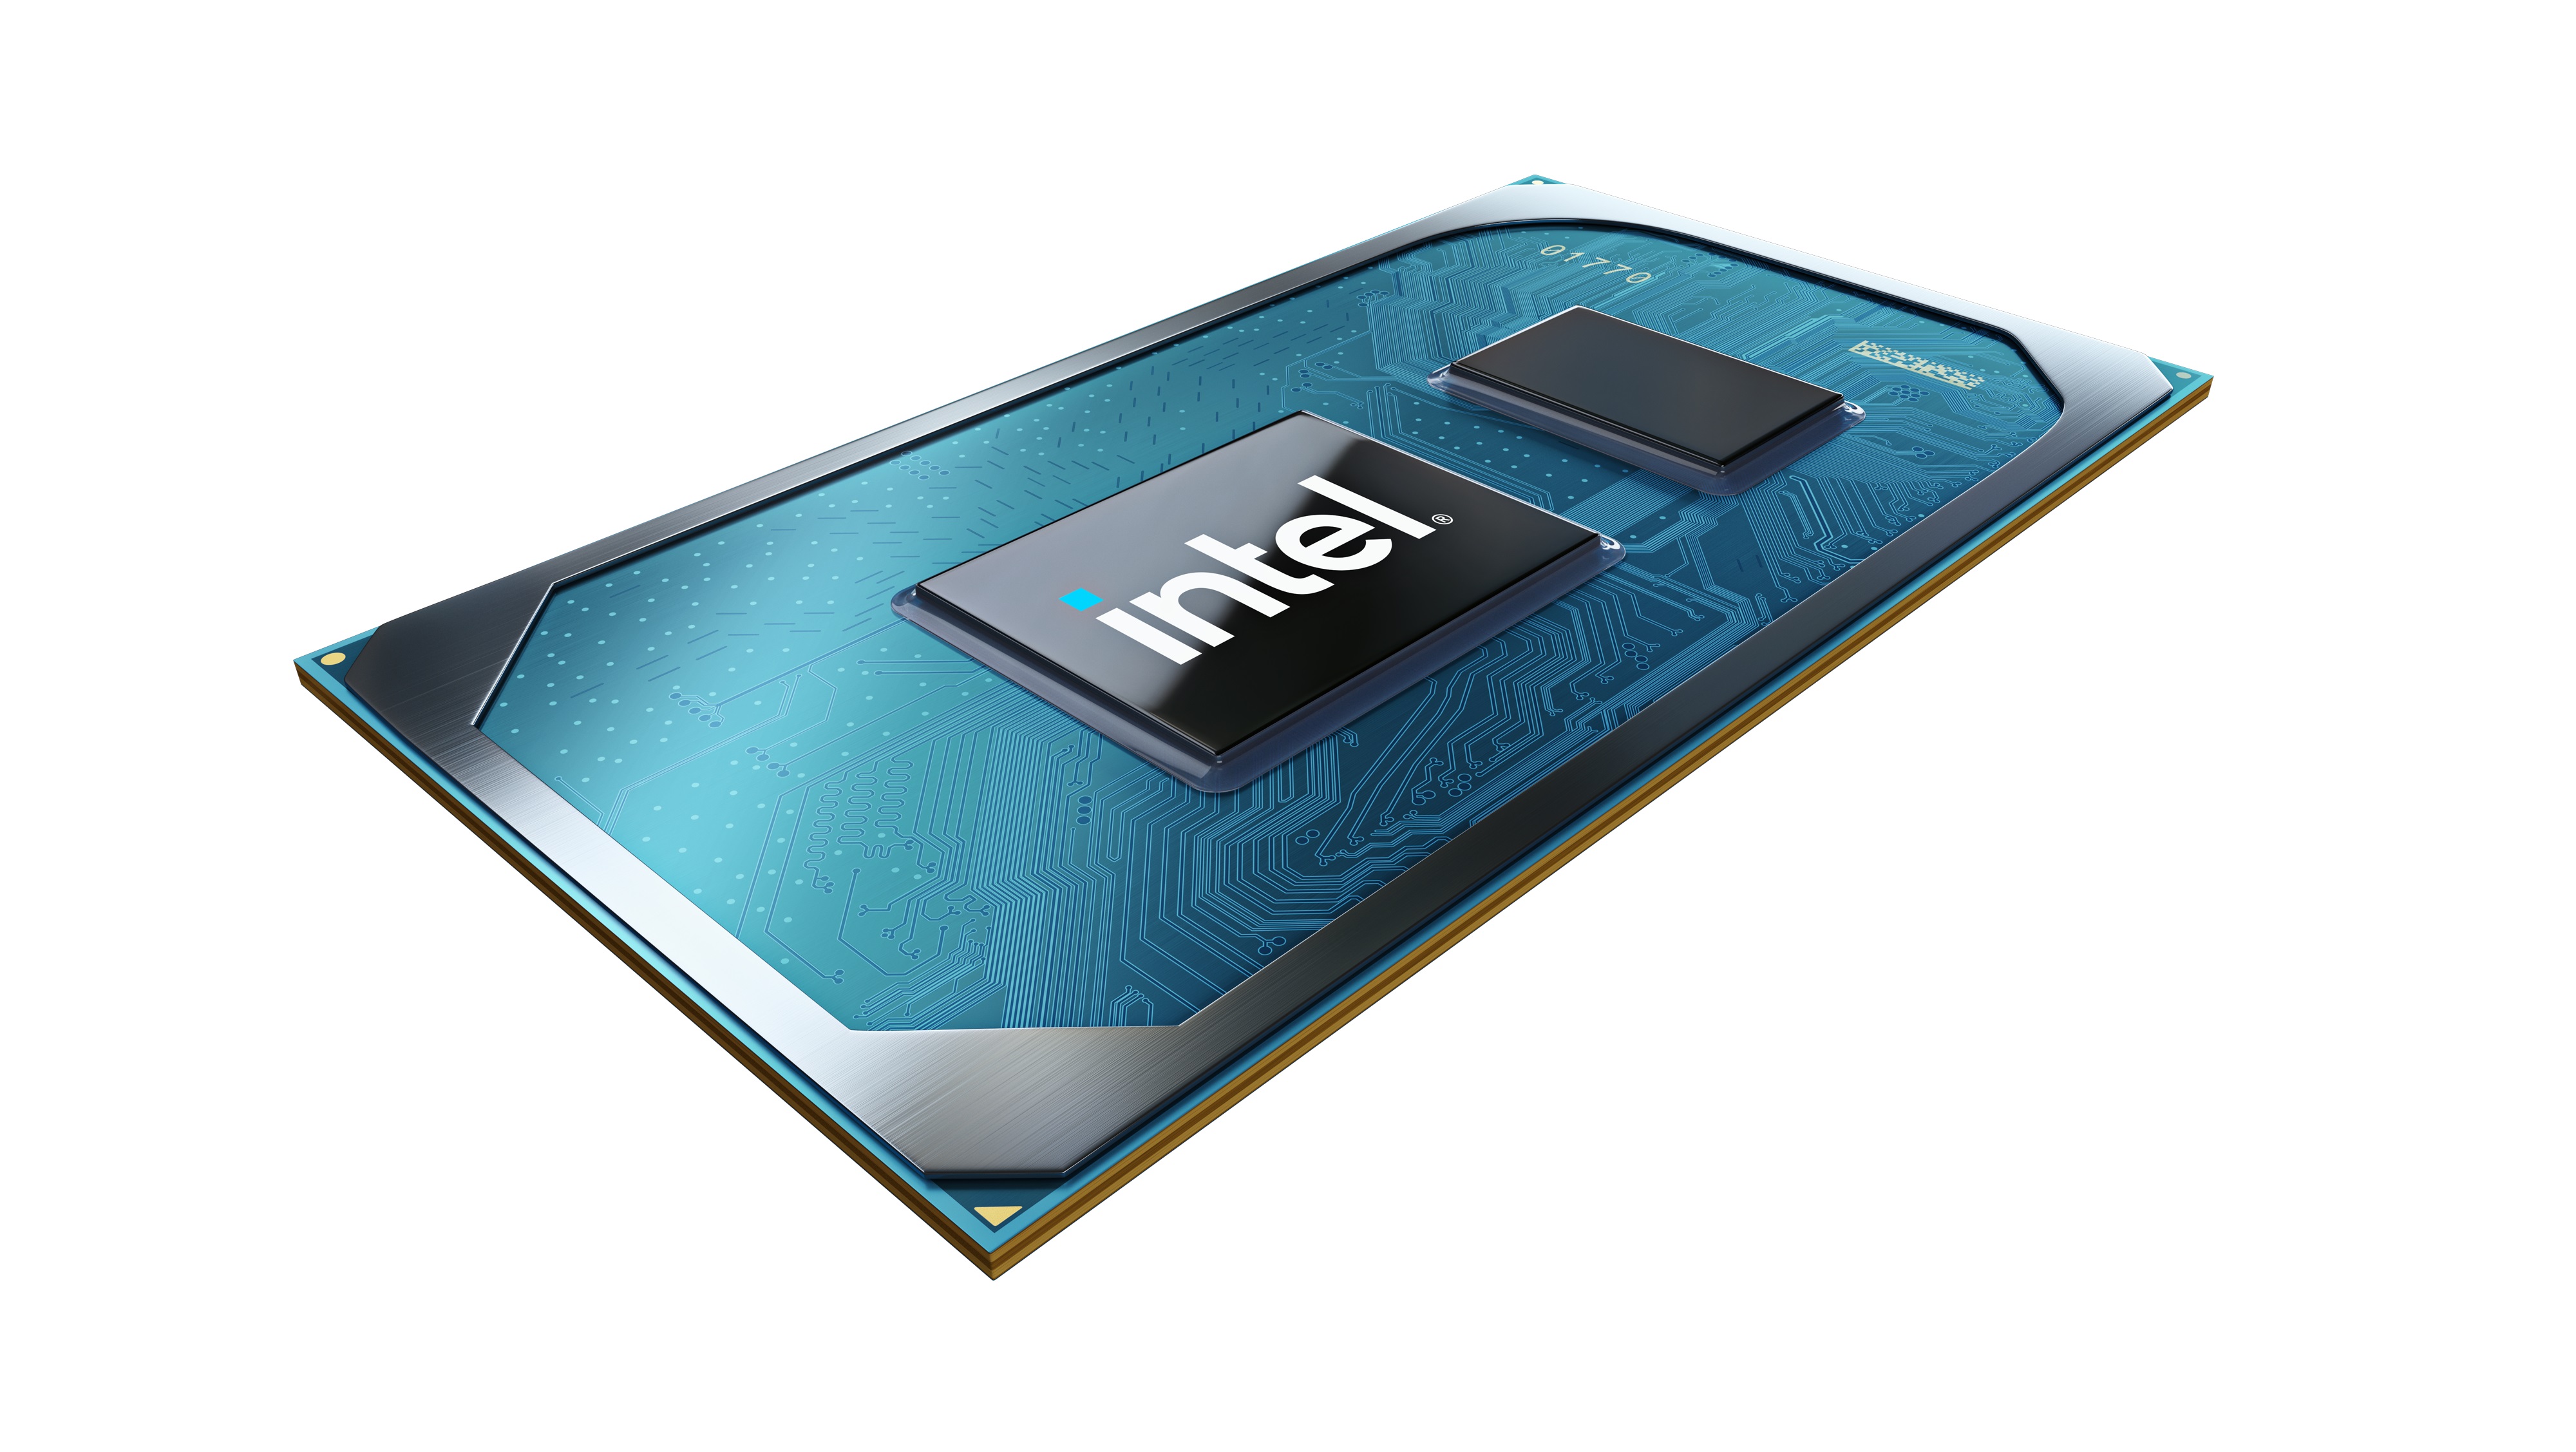 Intel Core i5-1135G7 Processor - Benchmarks and Specs